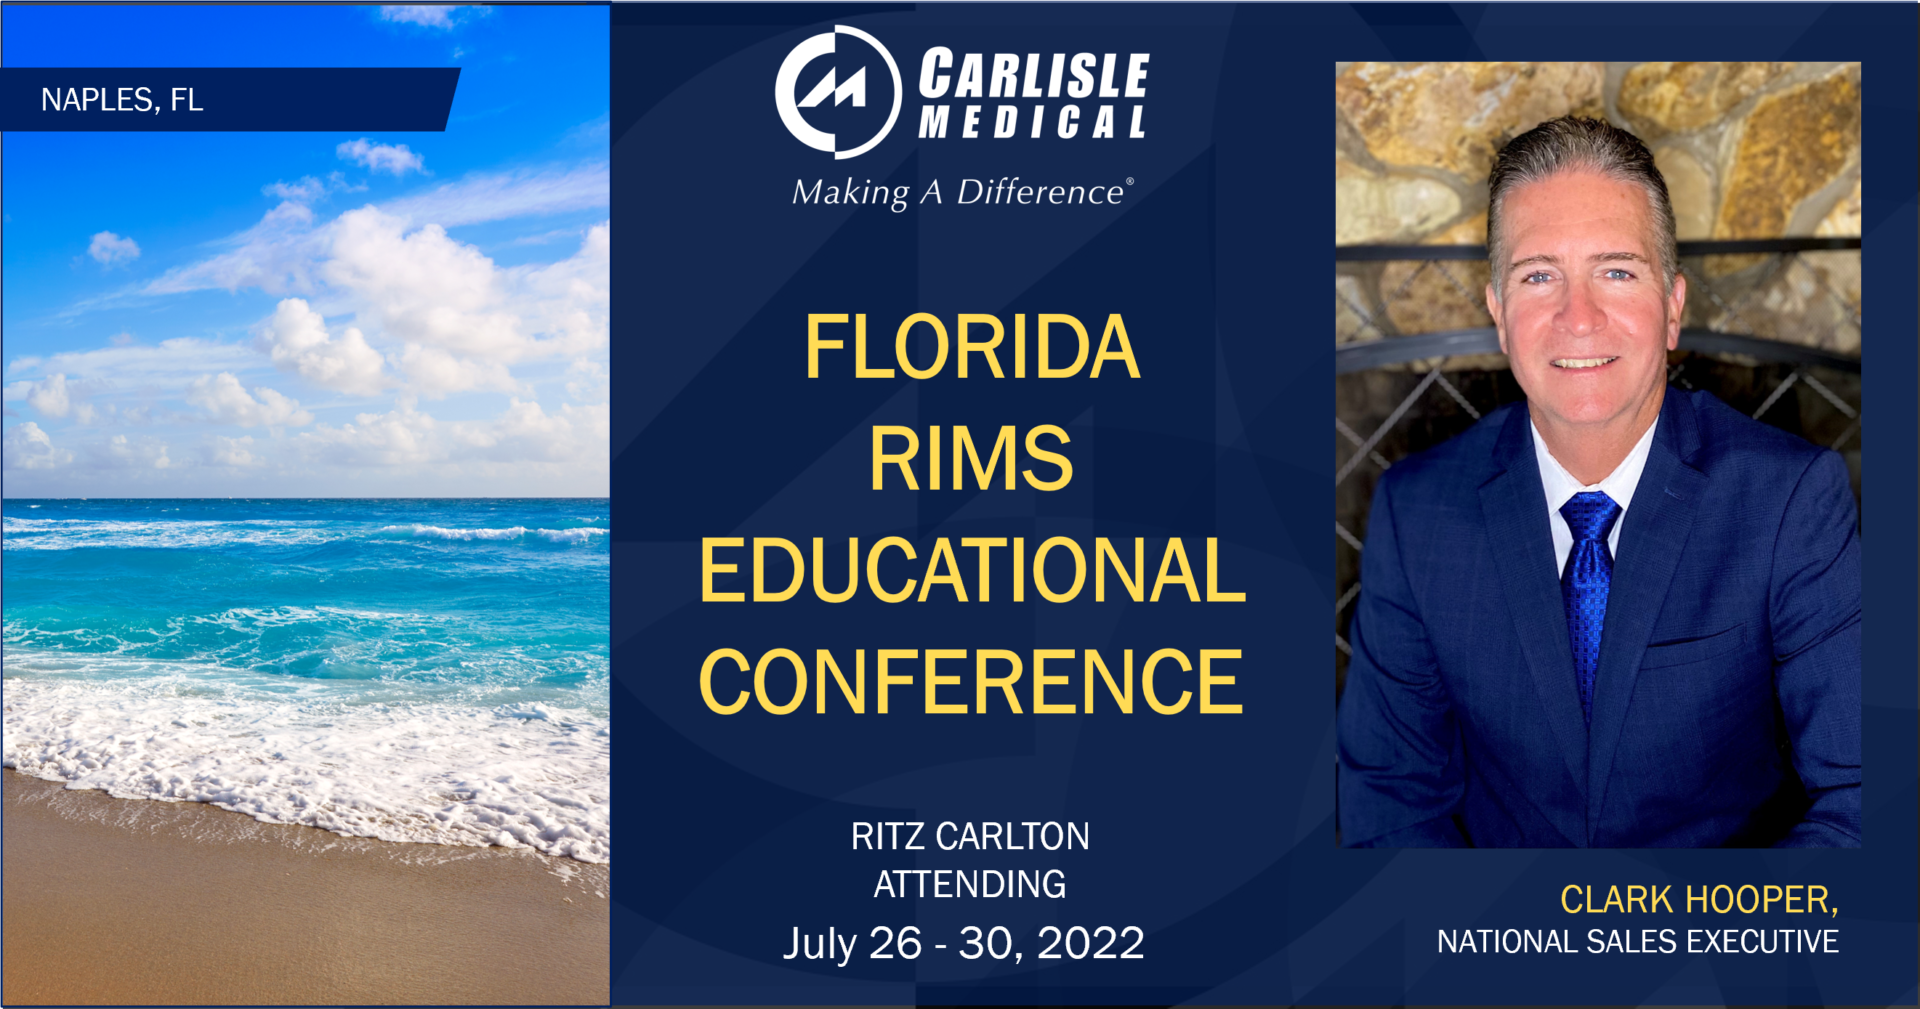 Carlisle Medical Will Be Attending The Florida RIMS Educational Conference